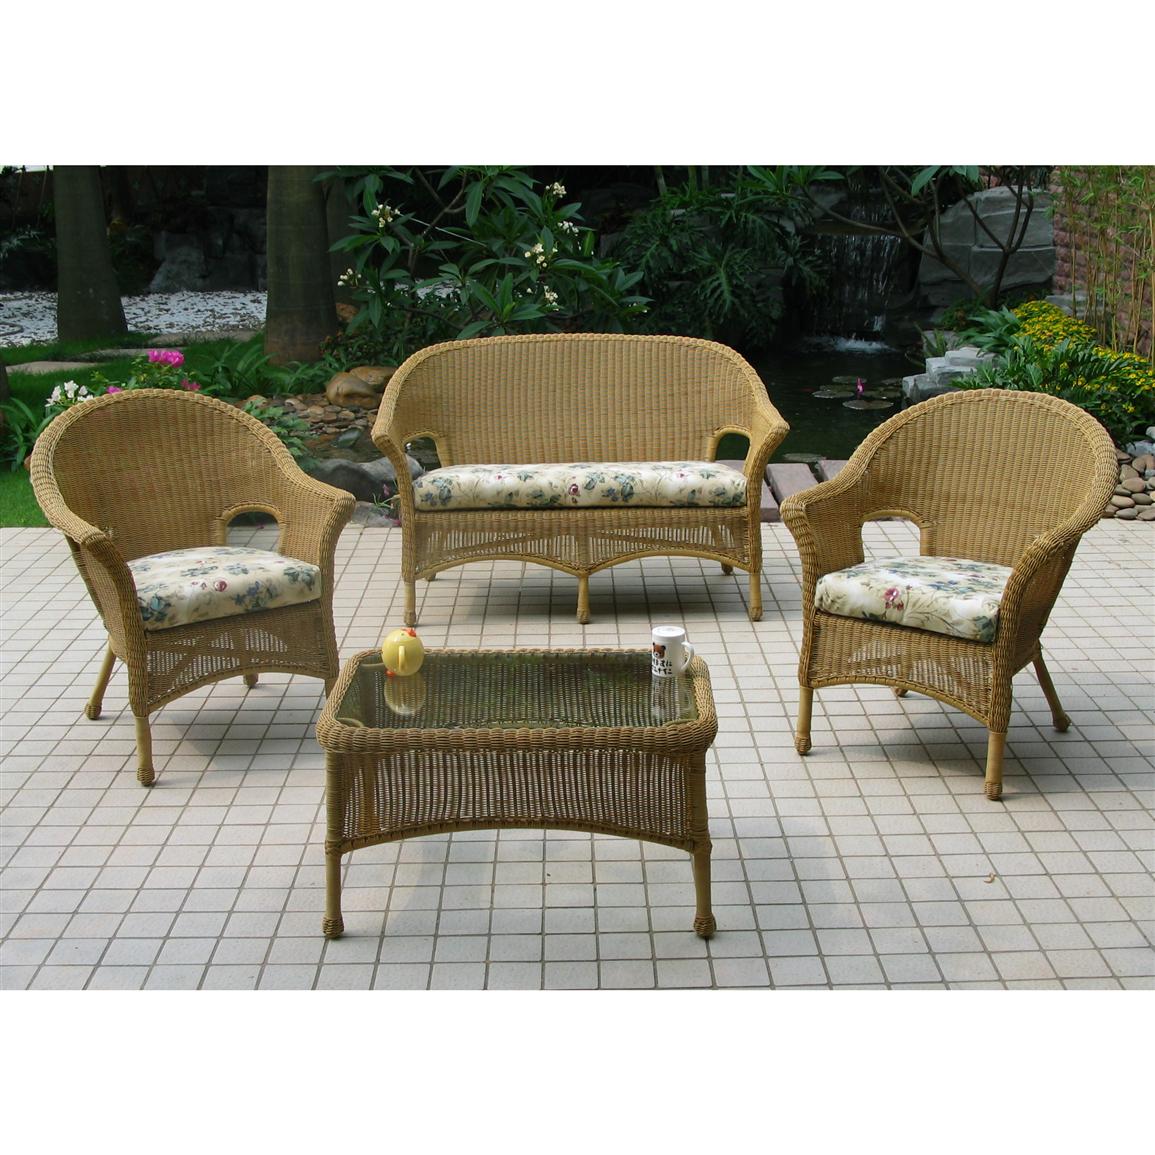 Chicago Wicker® 4 - Pc. Darby Wicker Patio Furniture Collection